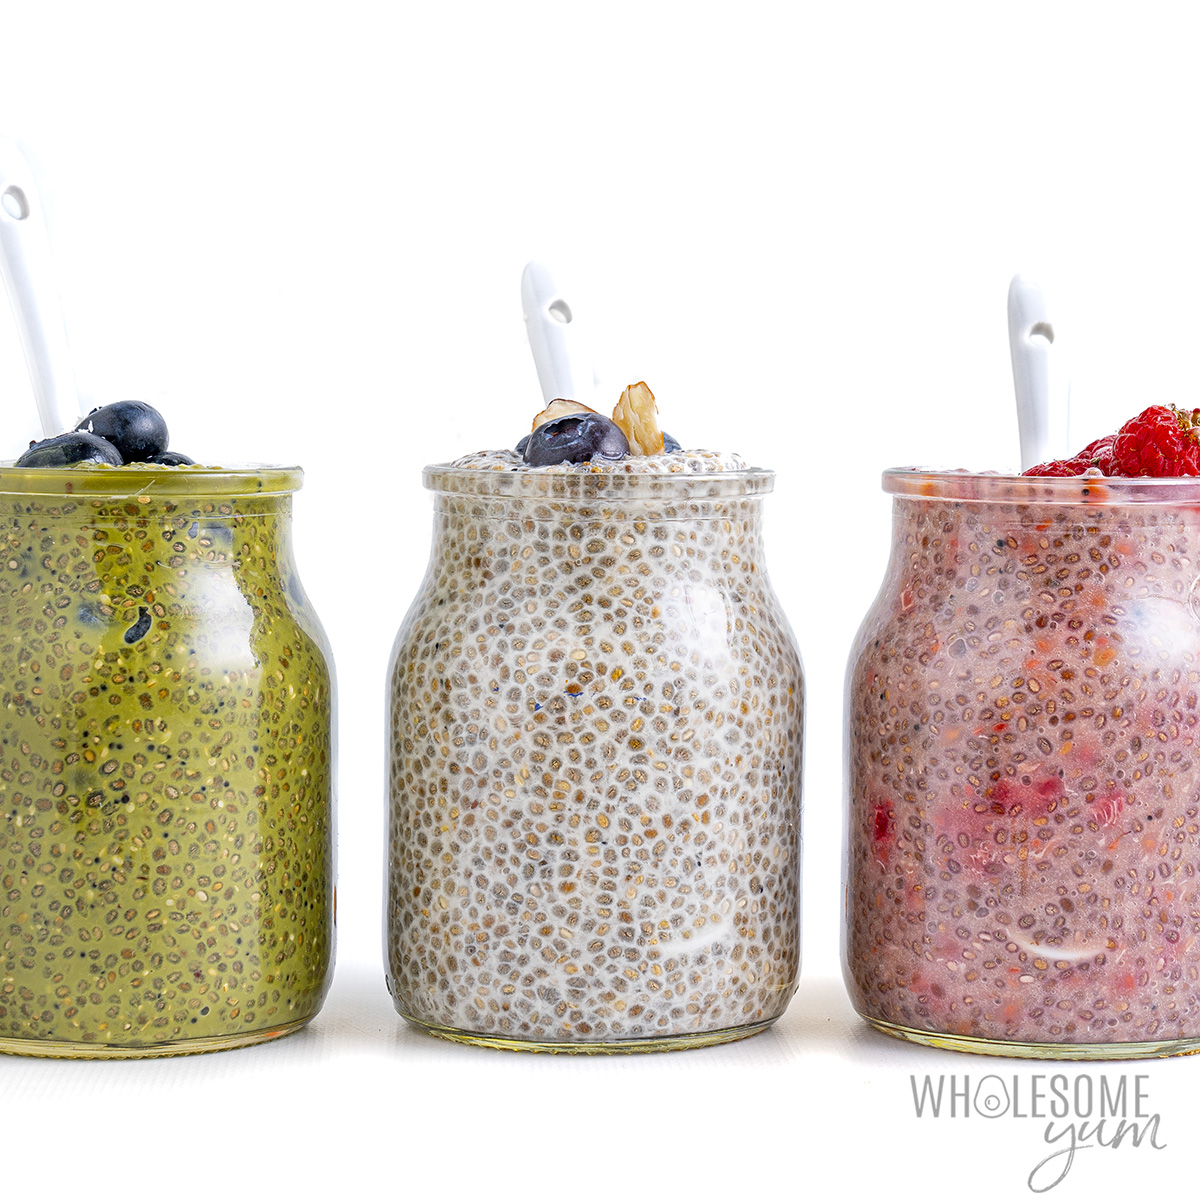 Chia Pudding Recipe (5 Flavors!) - Story Telling Co